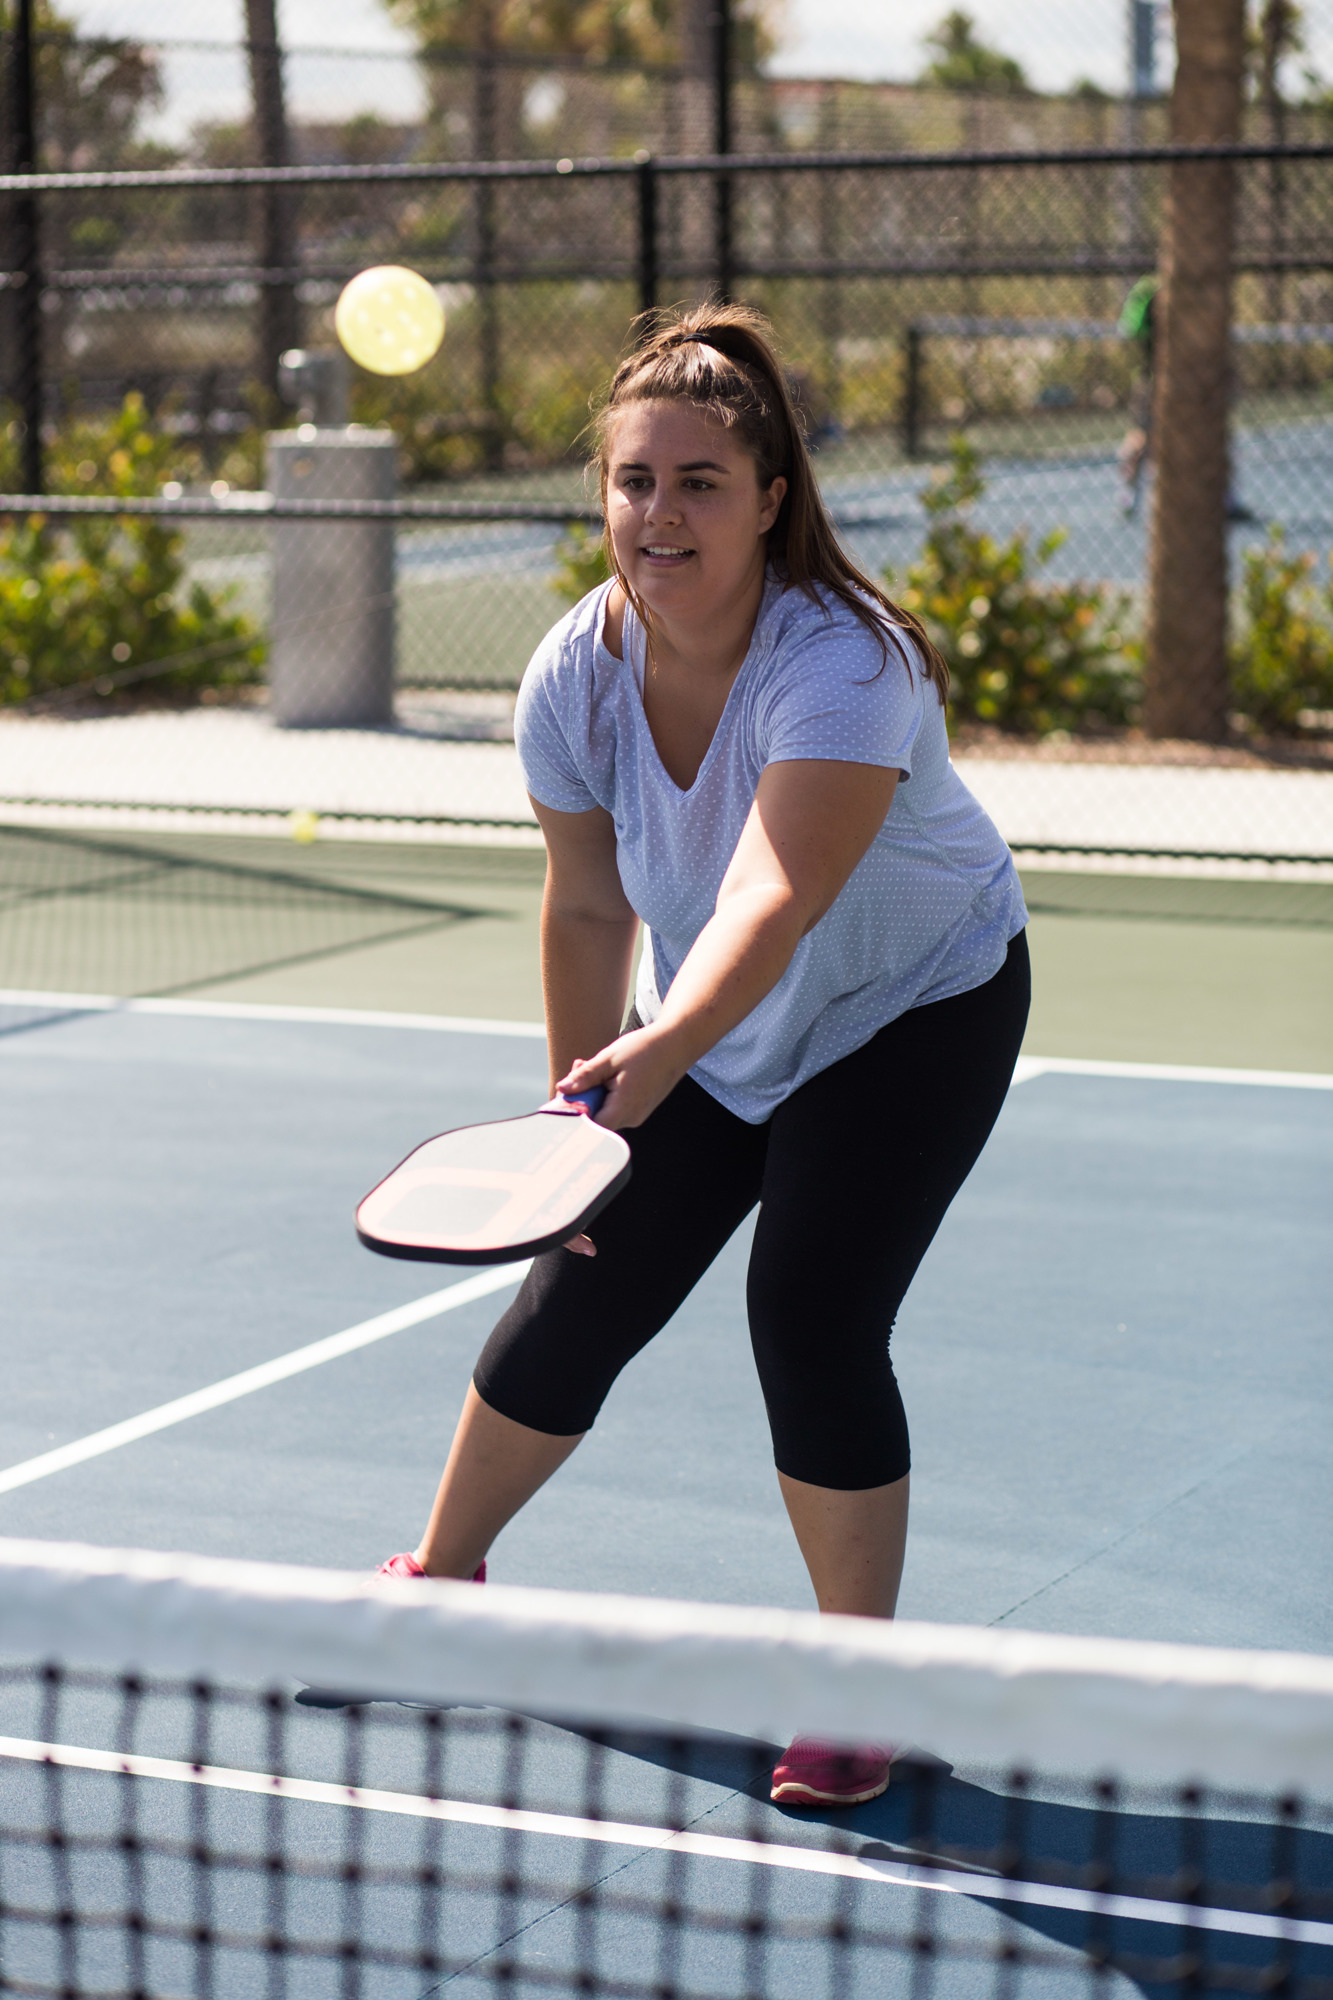 Pickleball can be played as a singles or doubles game and scores up to 11. Photos by Kayleigh Omang